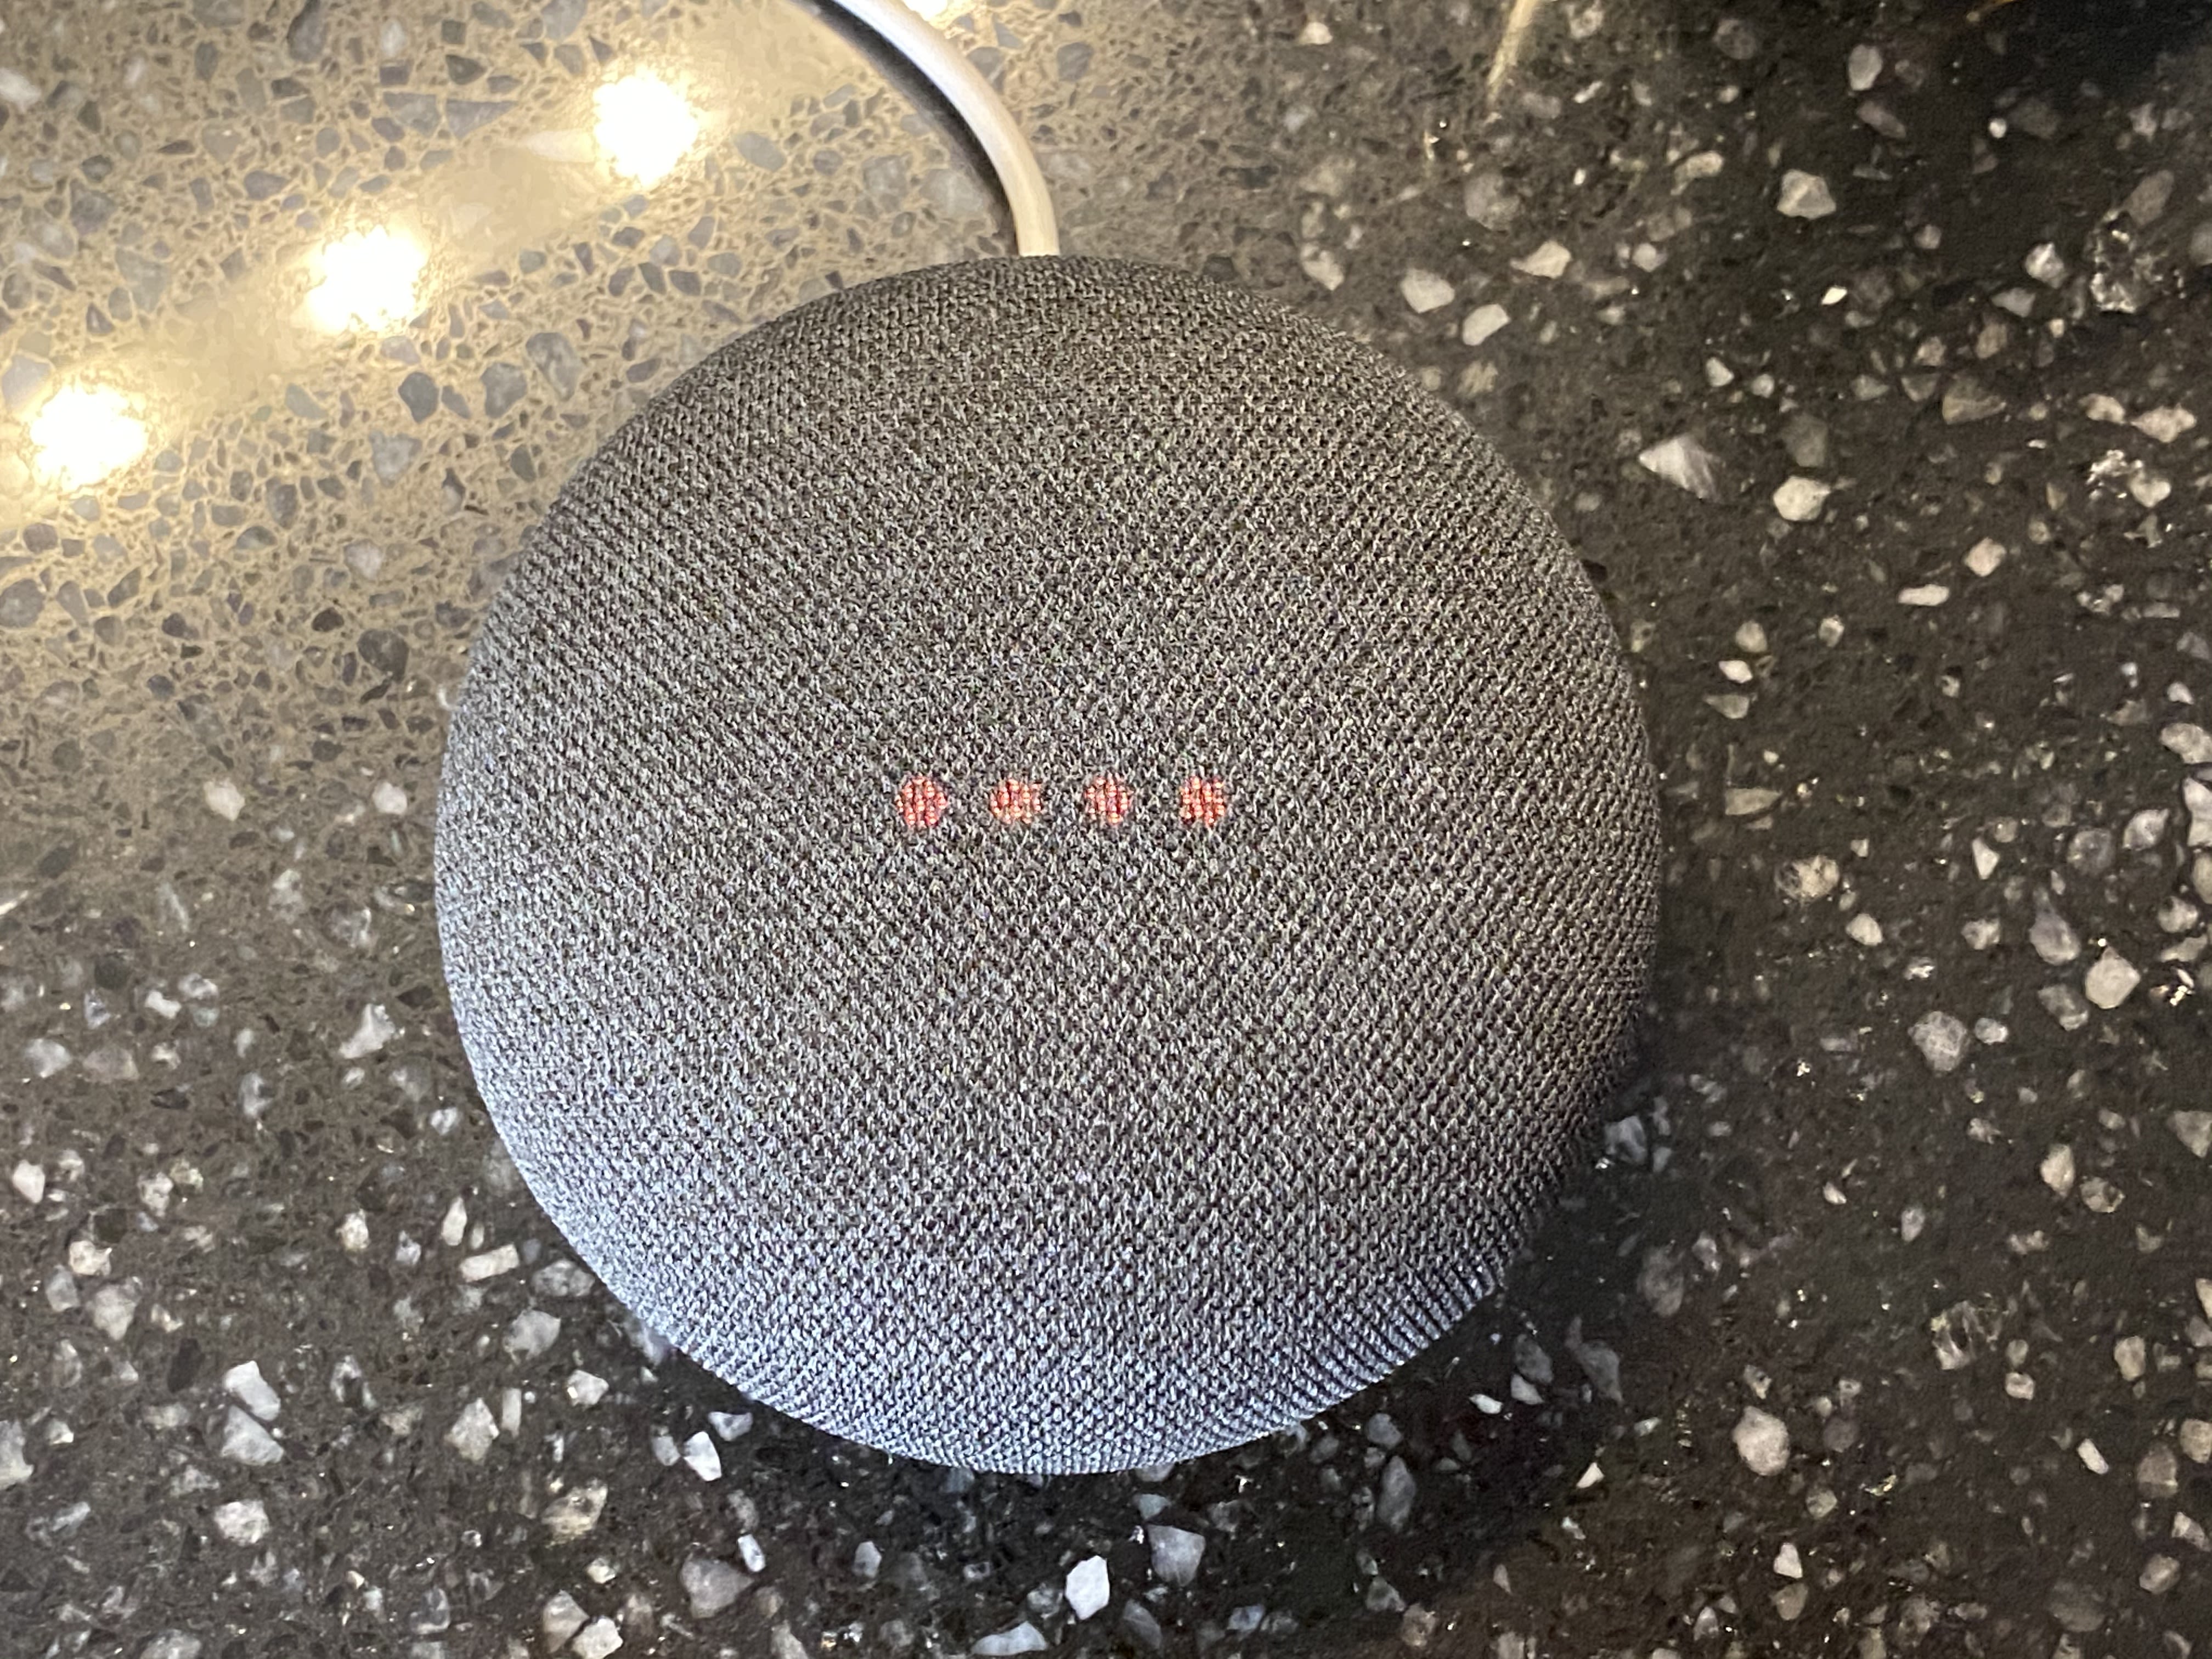 Google Home Mini review - The Verge